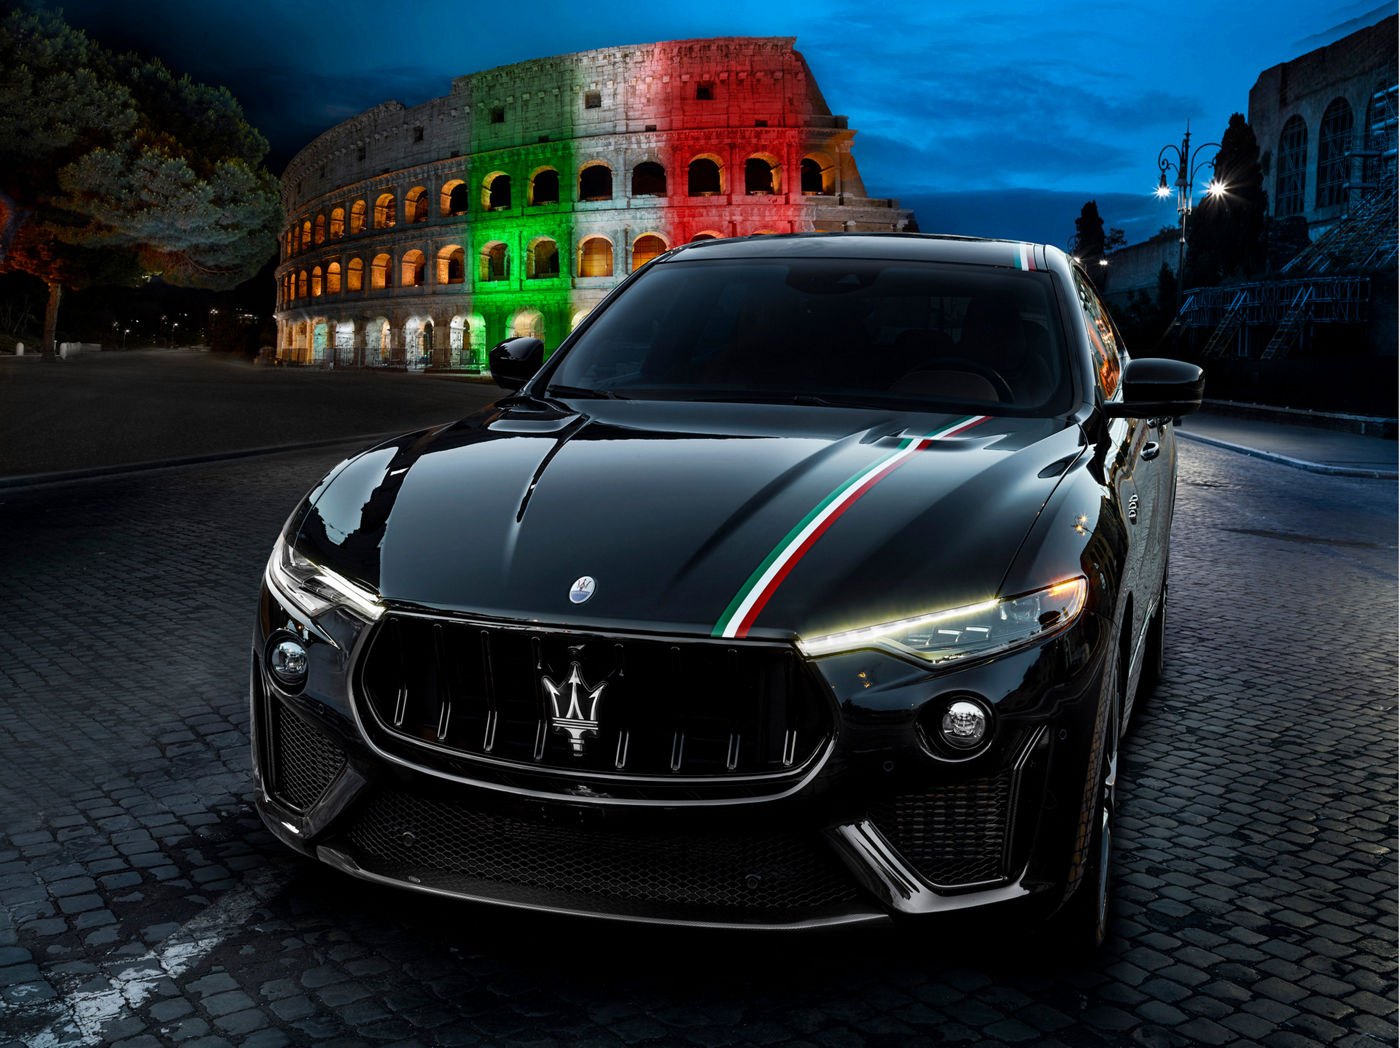 Maserati Levante Trofeo with Italian tricolor band, front view, in front of the Colosseum in Rome